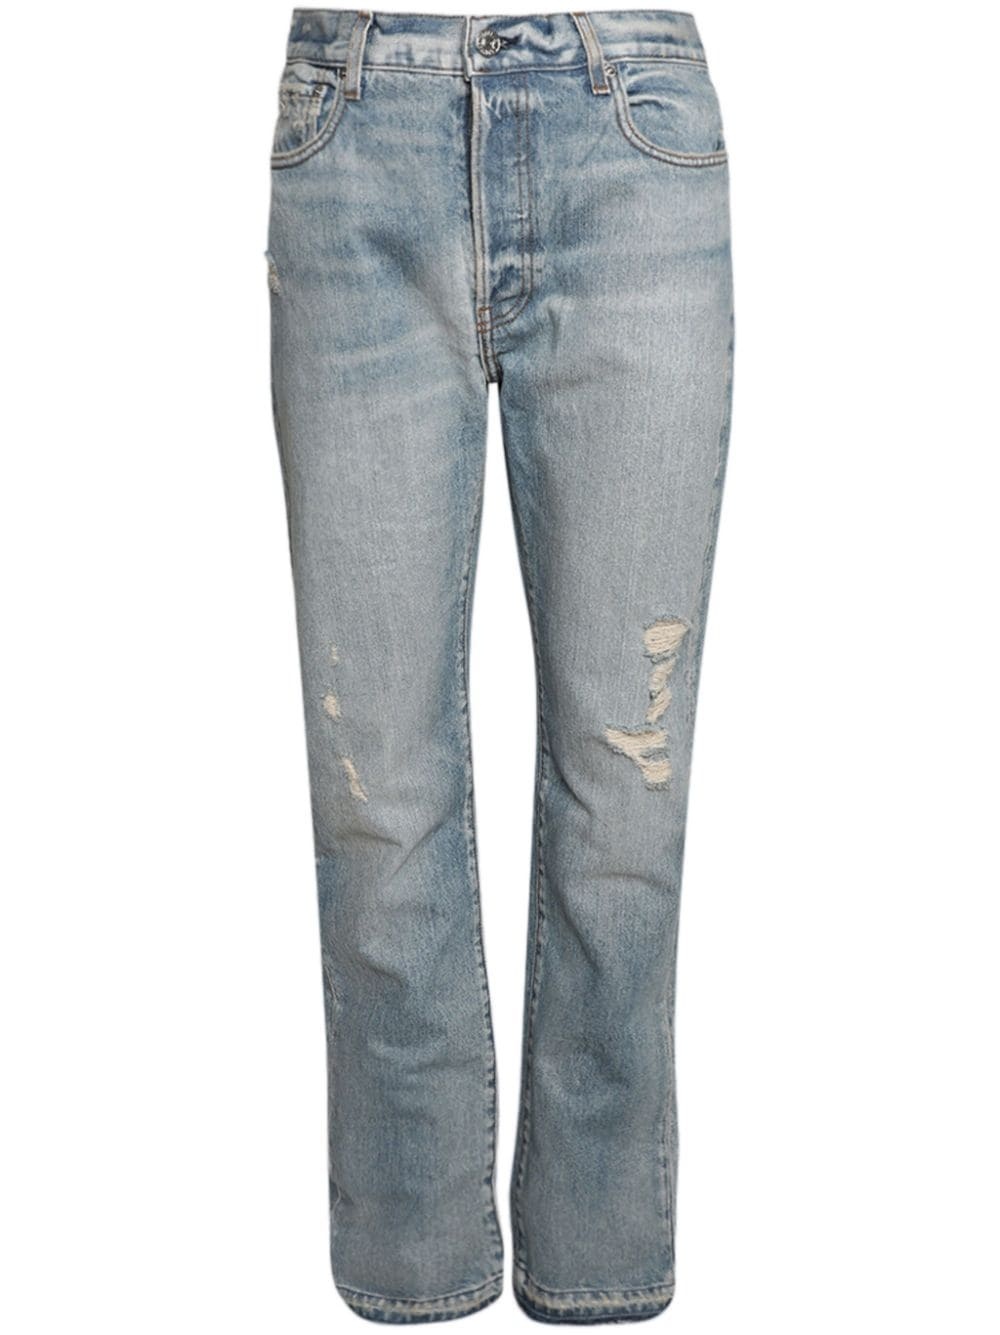 South Pointe 5001 jeans - 1